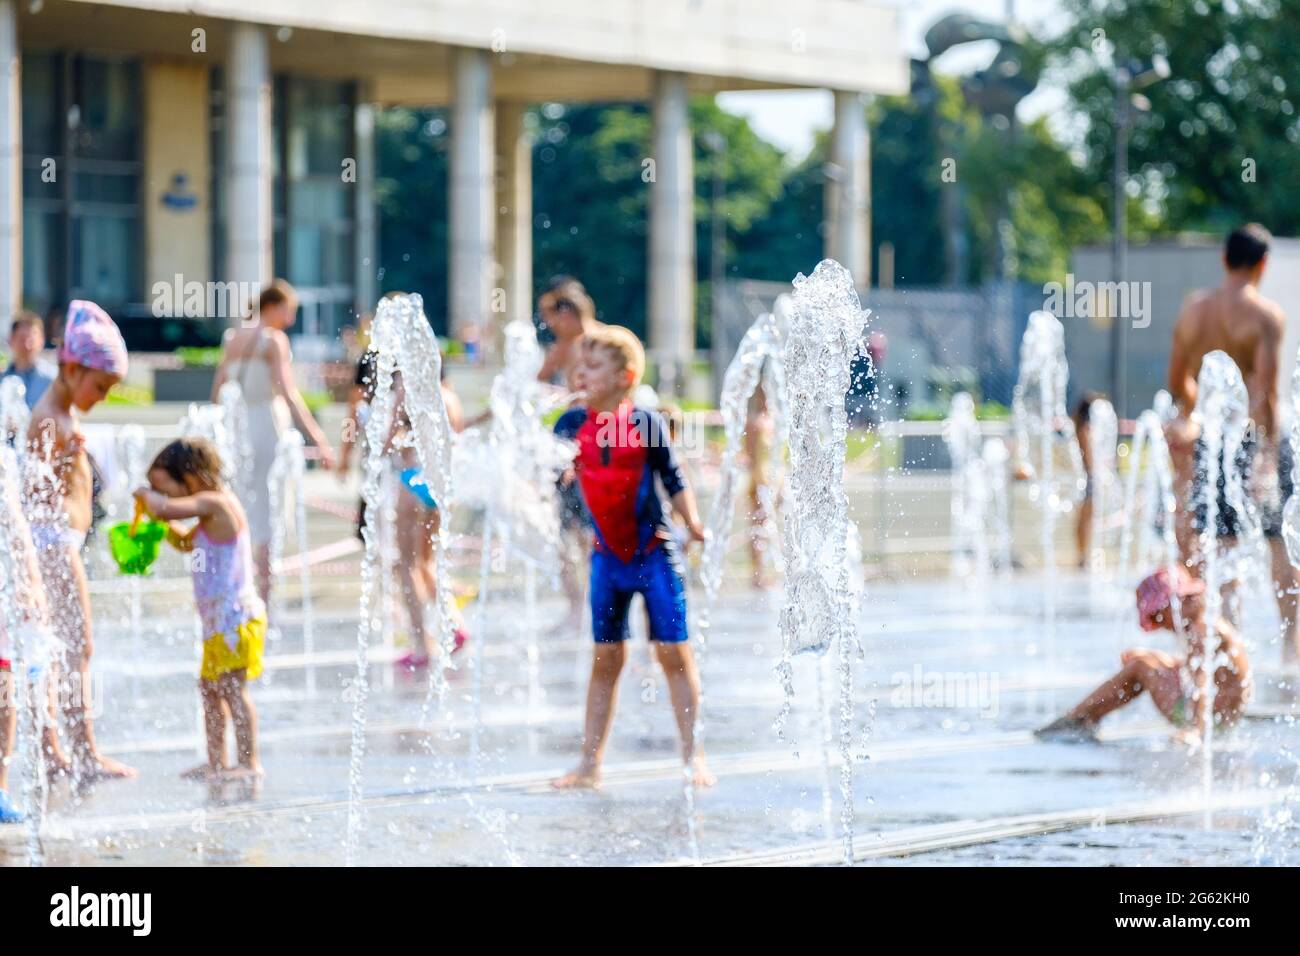 Moscow, Russia, June 26, 2021. Selective focus on jets of water in a city fountain on a hot summer day. In the blurred background children and adults are batning and having fun. Stock Photo